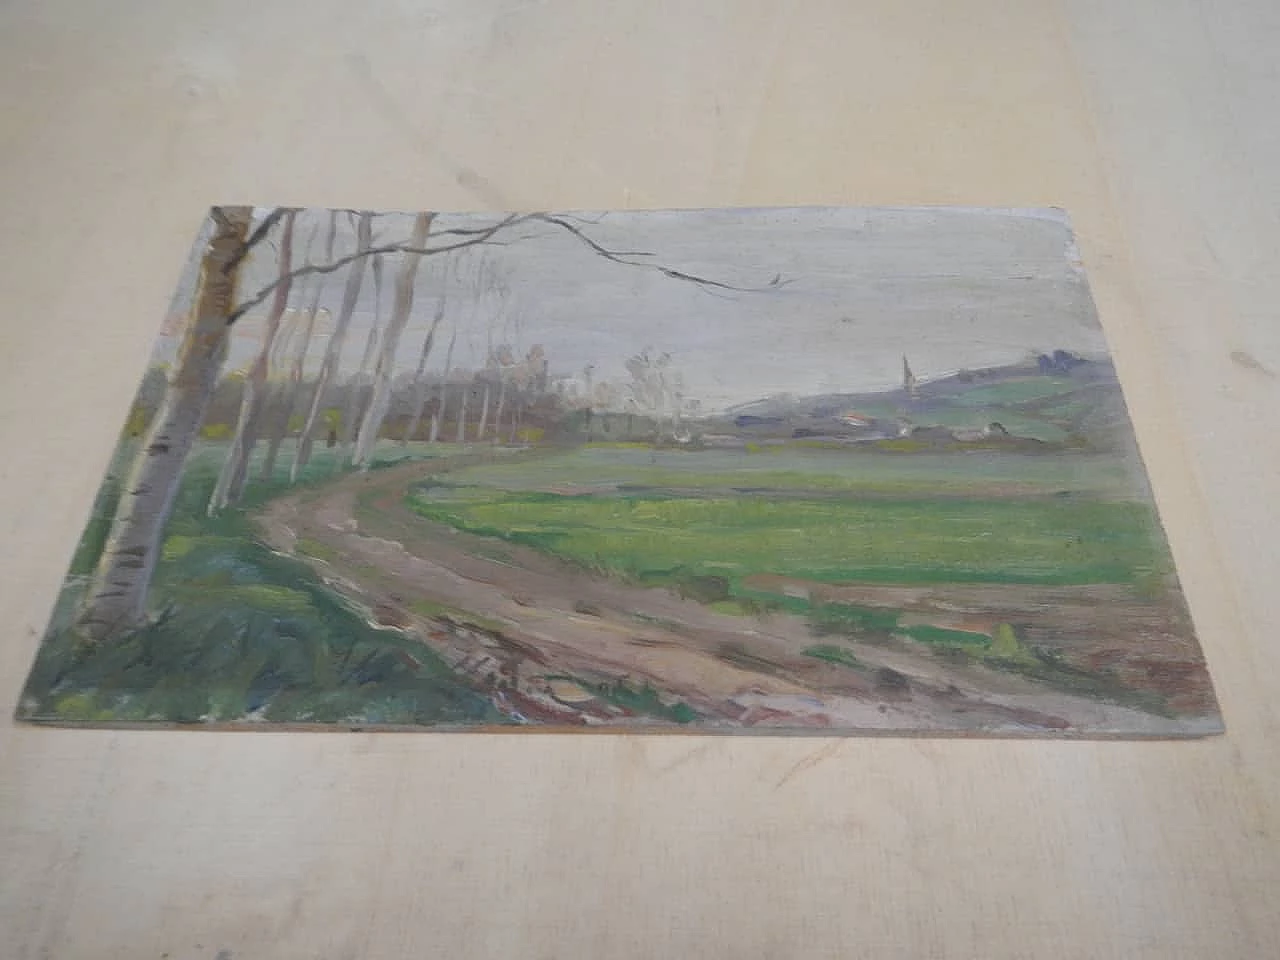 Des Champs, road, painting on wood, early 20th century 9